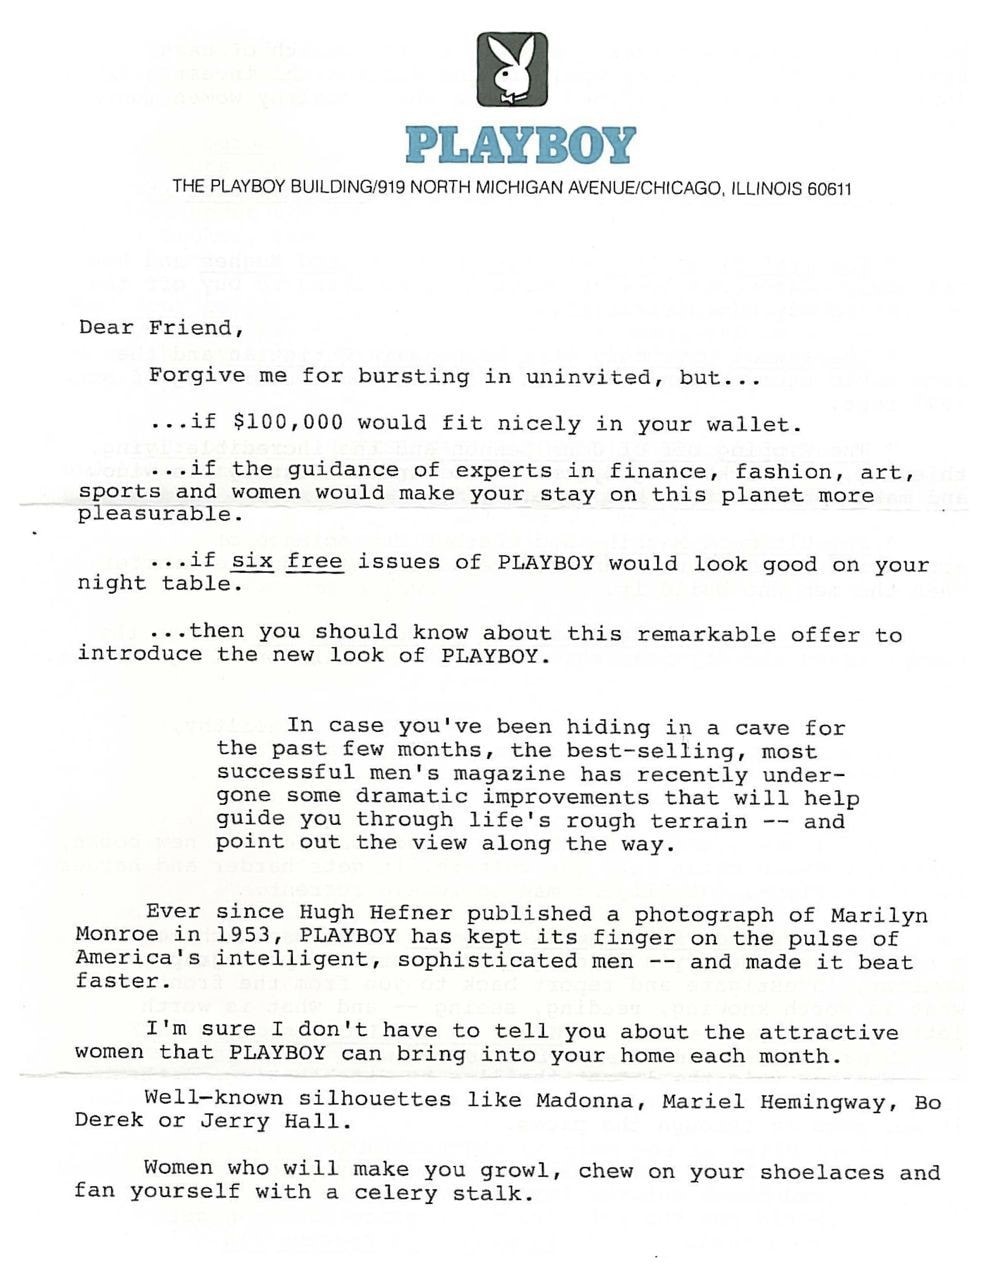 Persuasive Sales Letter Examples from www.comm100.com